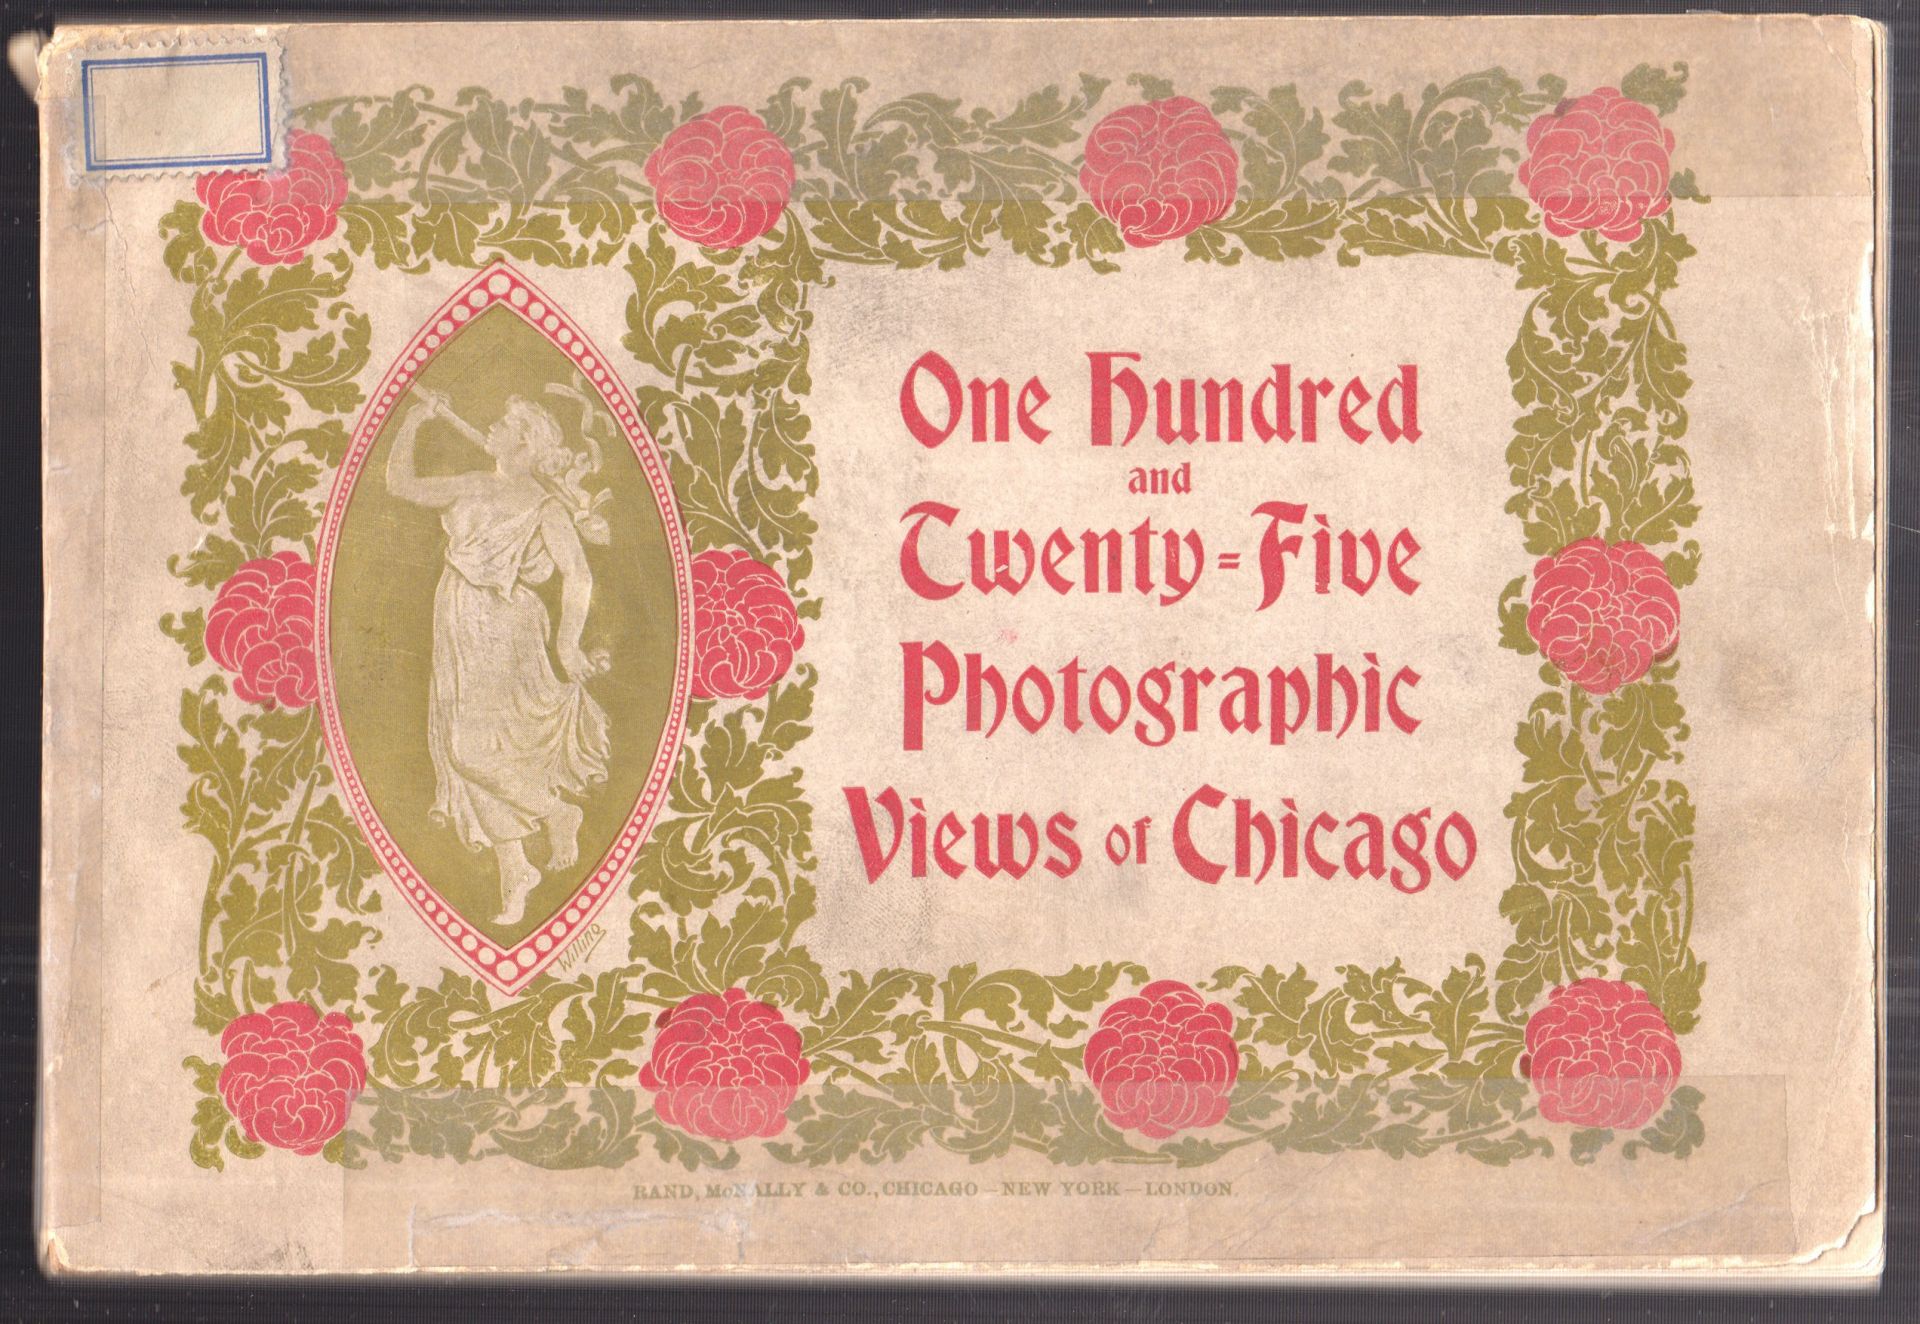  One Hundred and Twenty-Five Photographic Views of Chicago. The most complete collection ever published in this form.